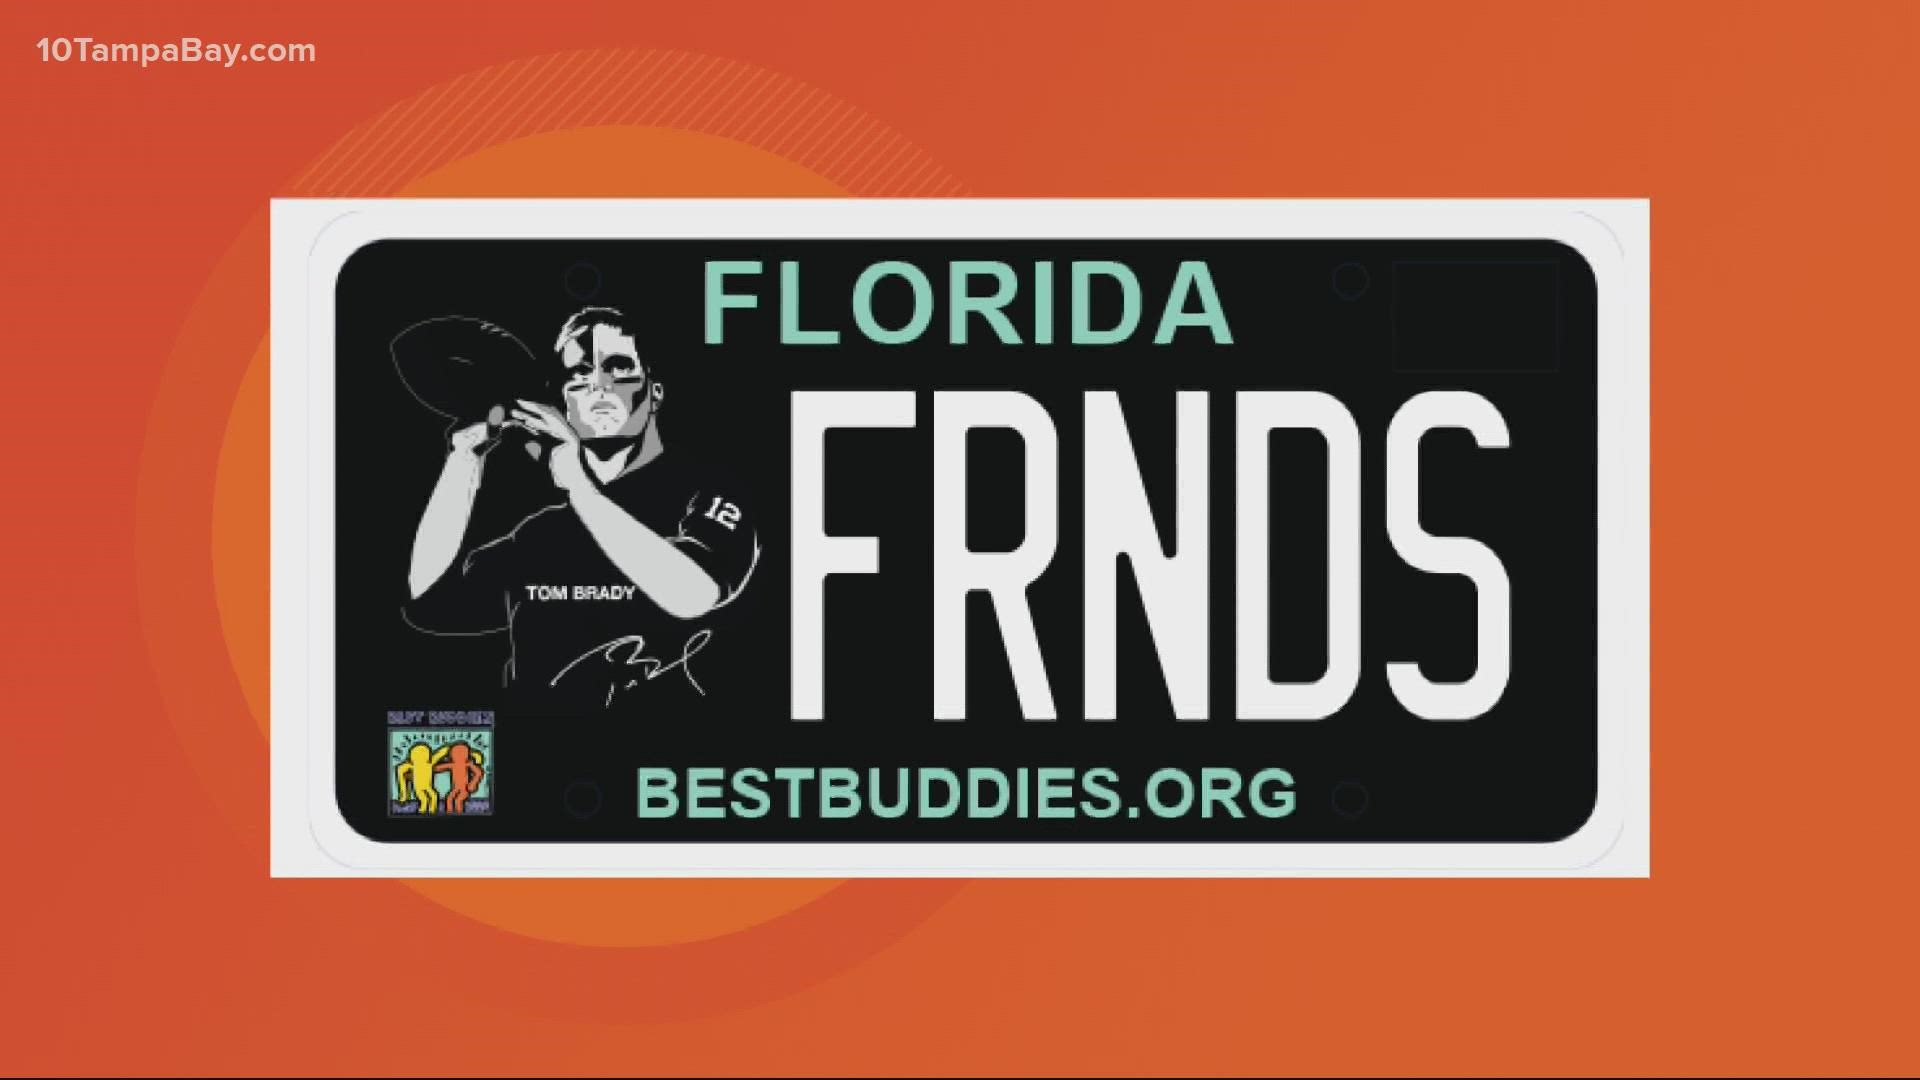 The license plate is available to registered Florida automobiles only.